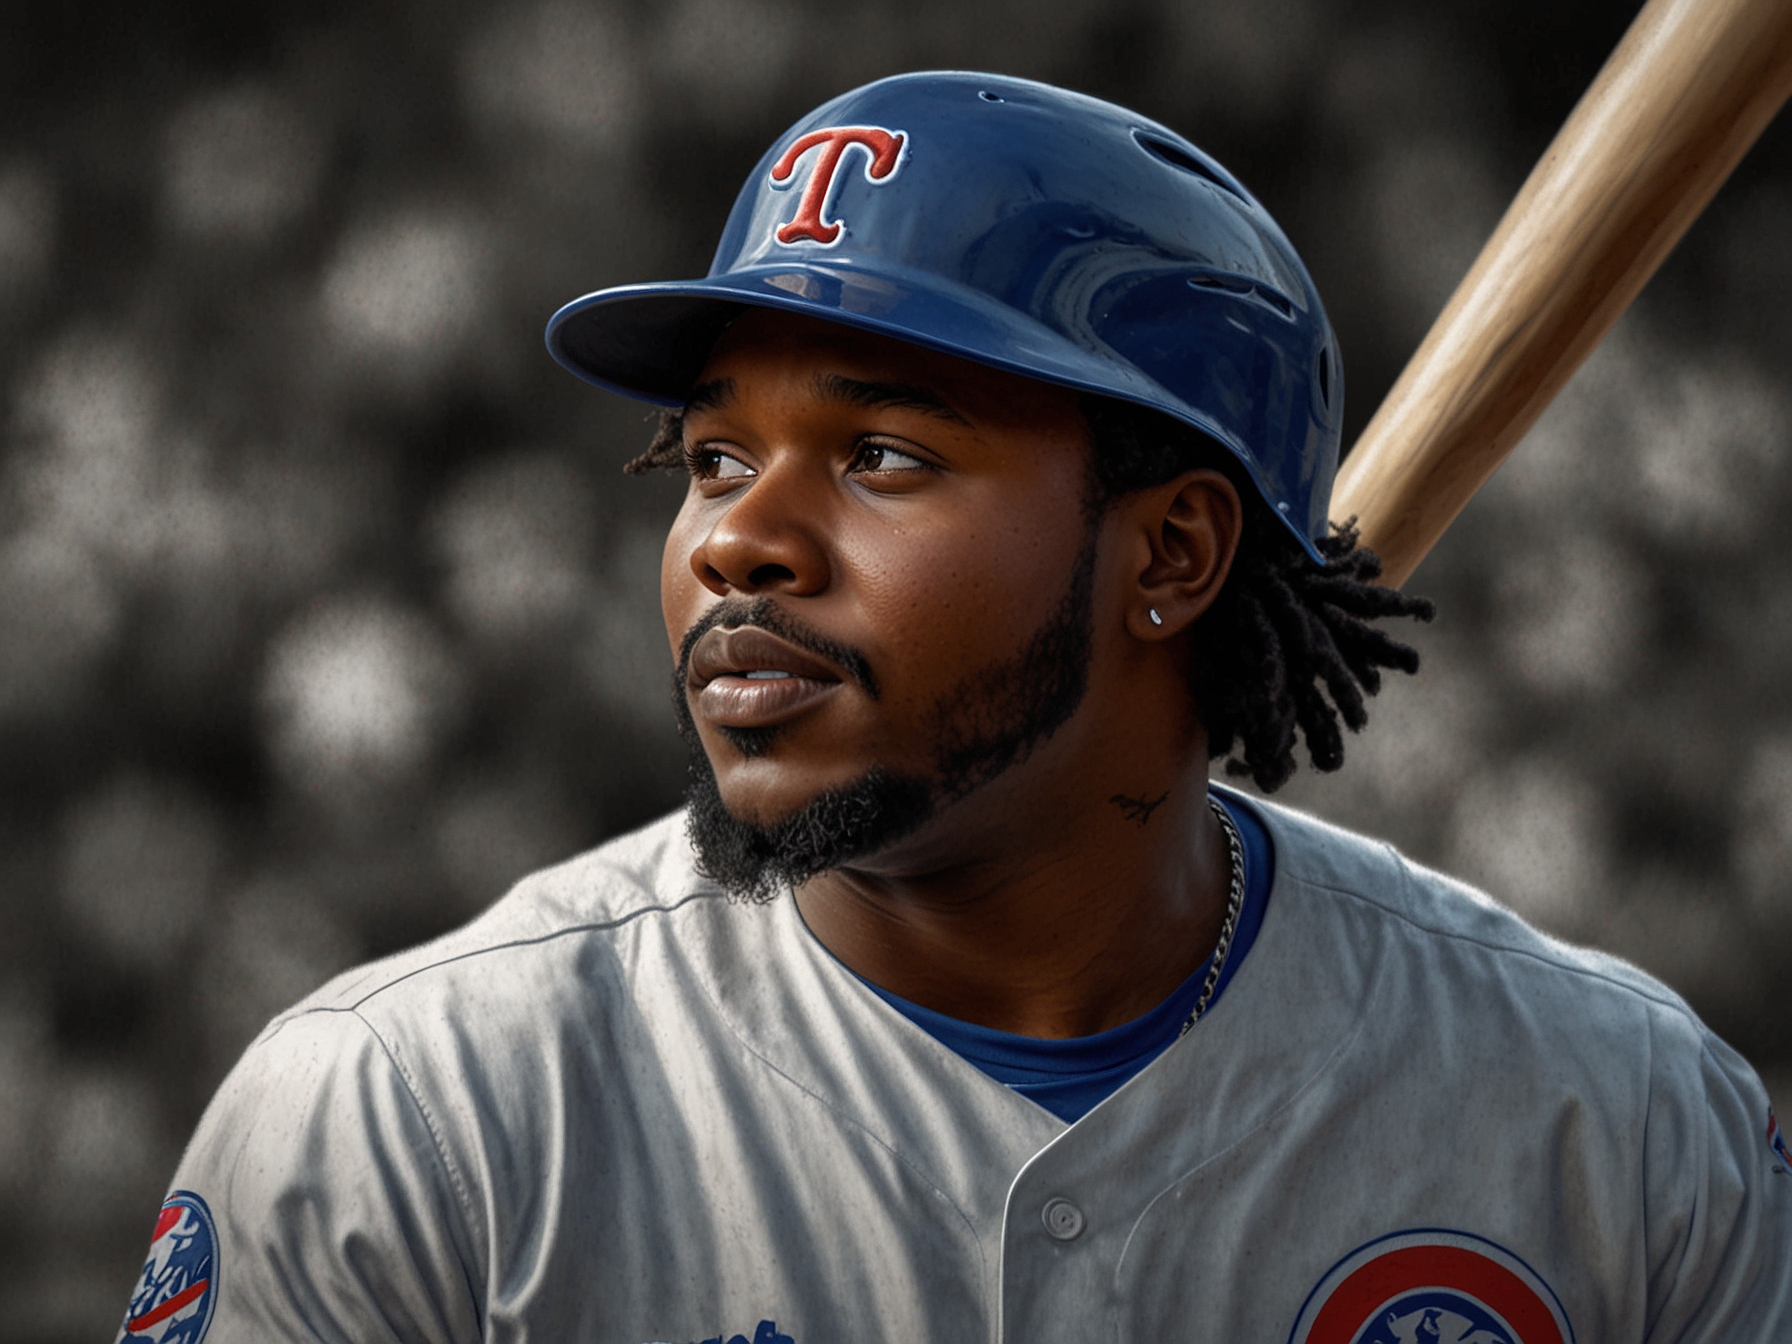 Image of Vladimir Guerrero Jr. at bat during the game, representing the high expectations on Toronto's offense amid their inconsistent season performance.